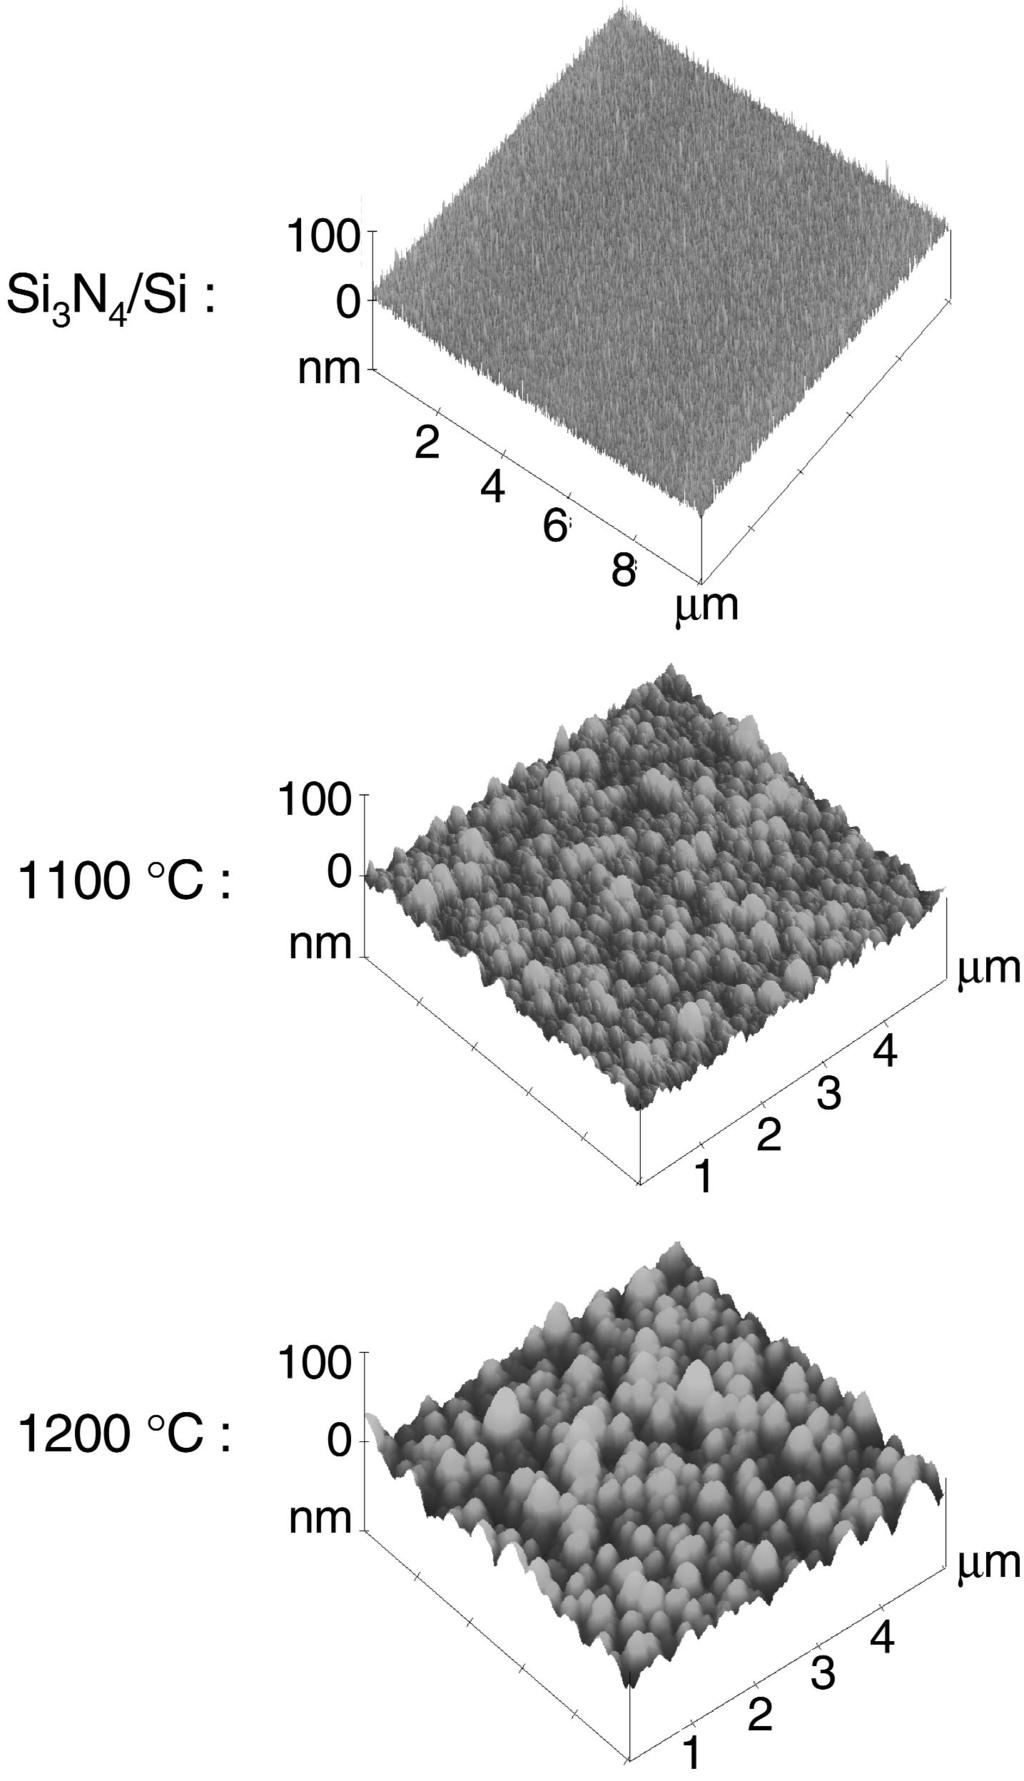 Microelectromechancial Fabrication The SiC-film samples grown on Si 3 N 4 /Si (100) substrate materials were patterned and processed in initial MEMS fabrication efforts.